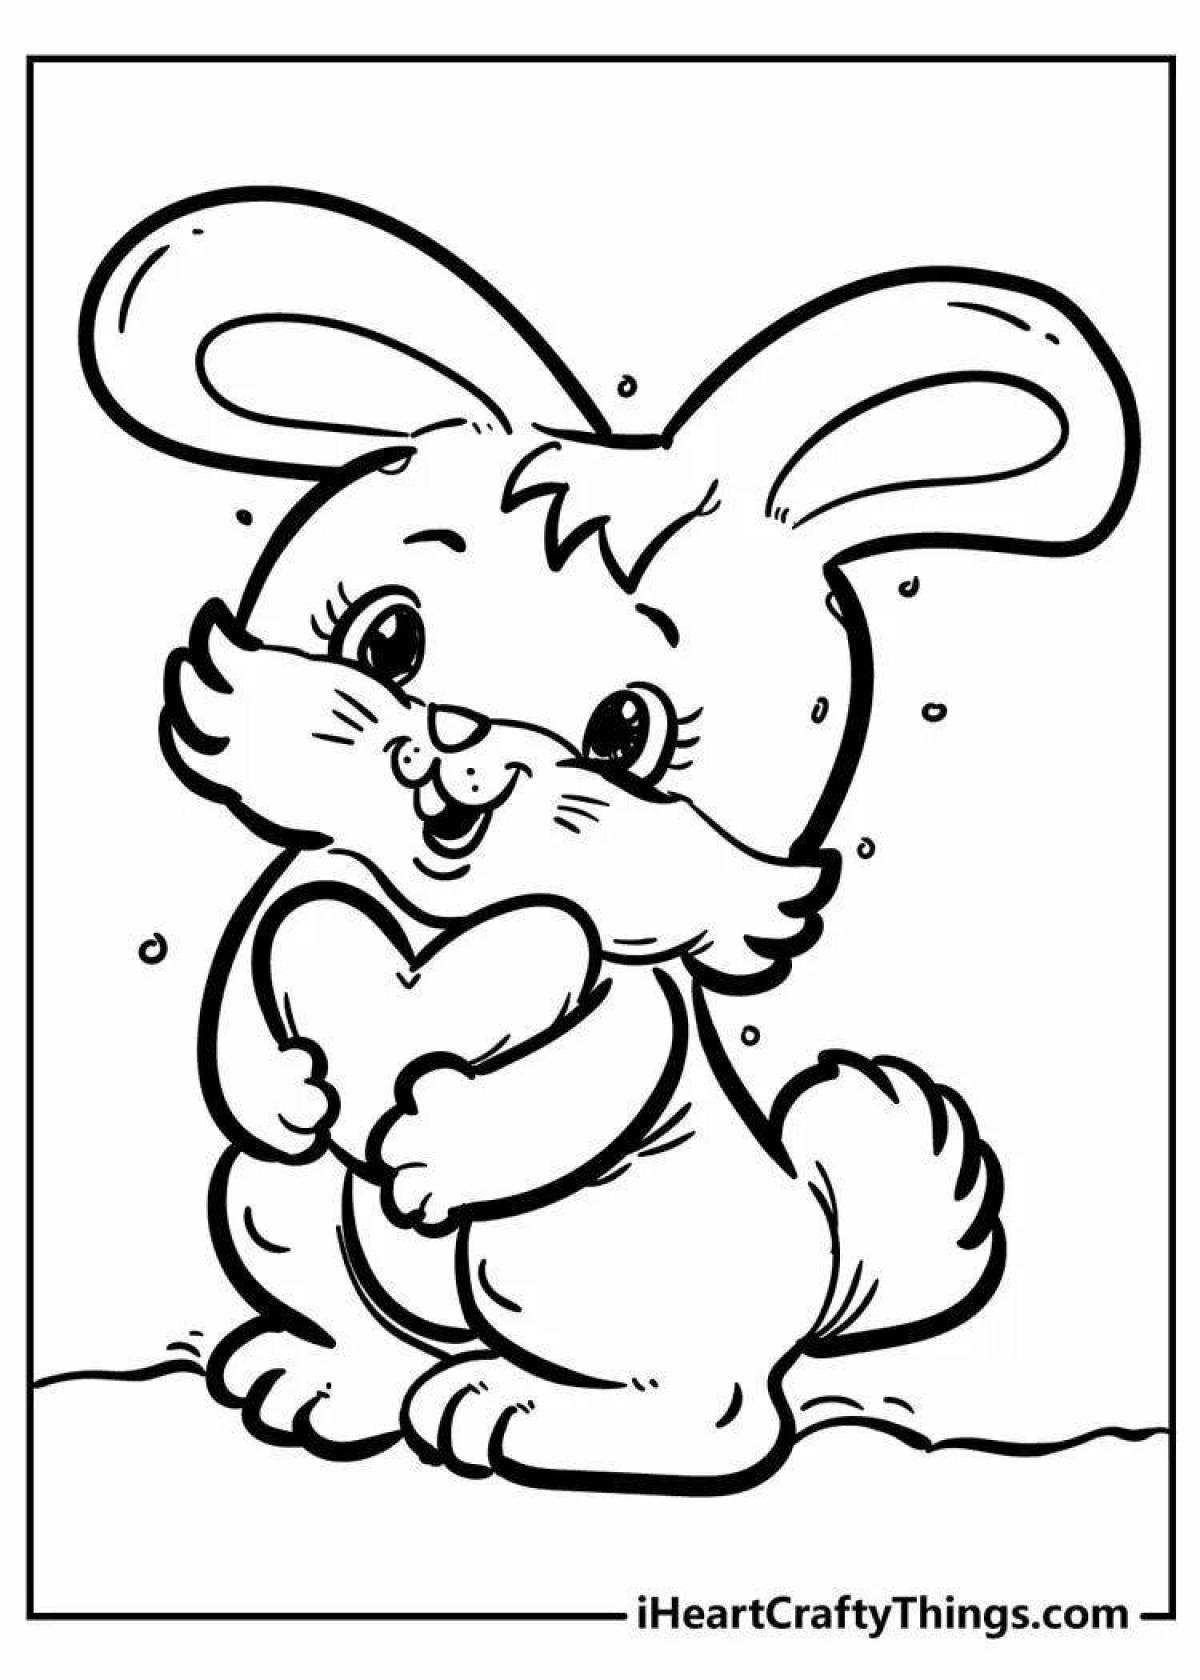 Coloring book sunny rabbit and cat